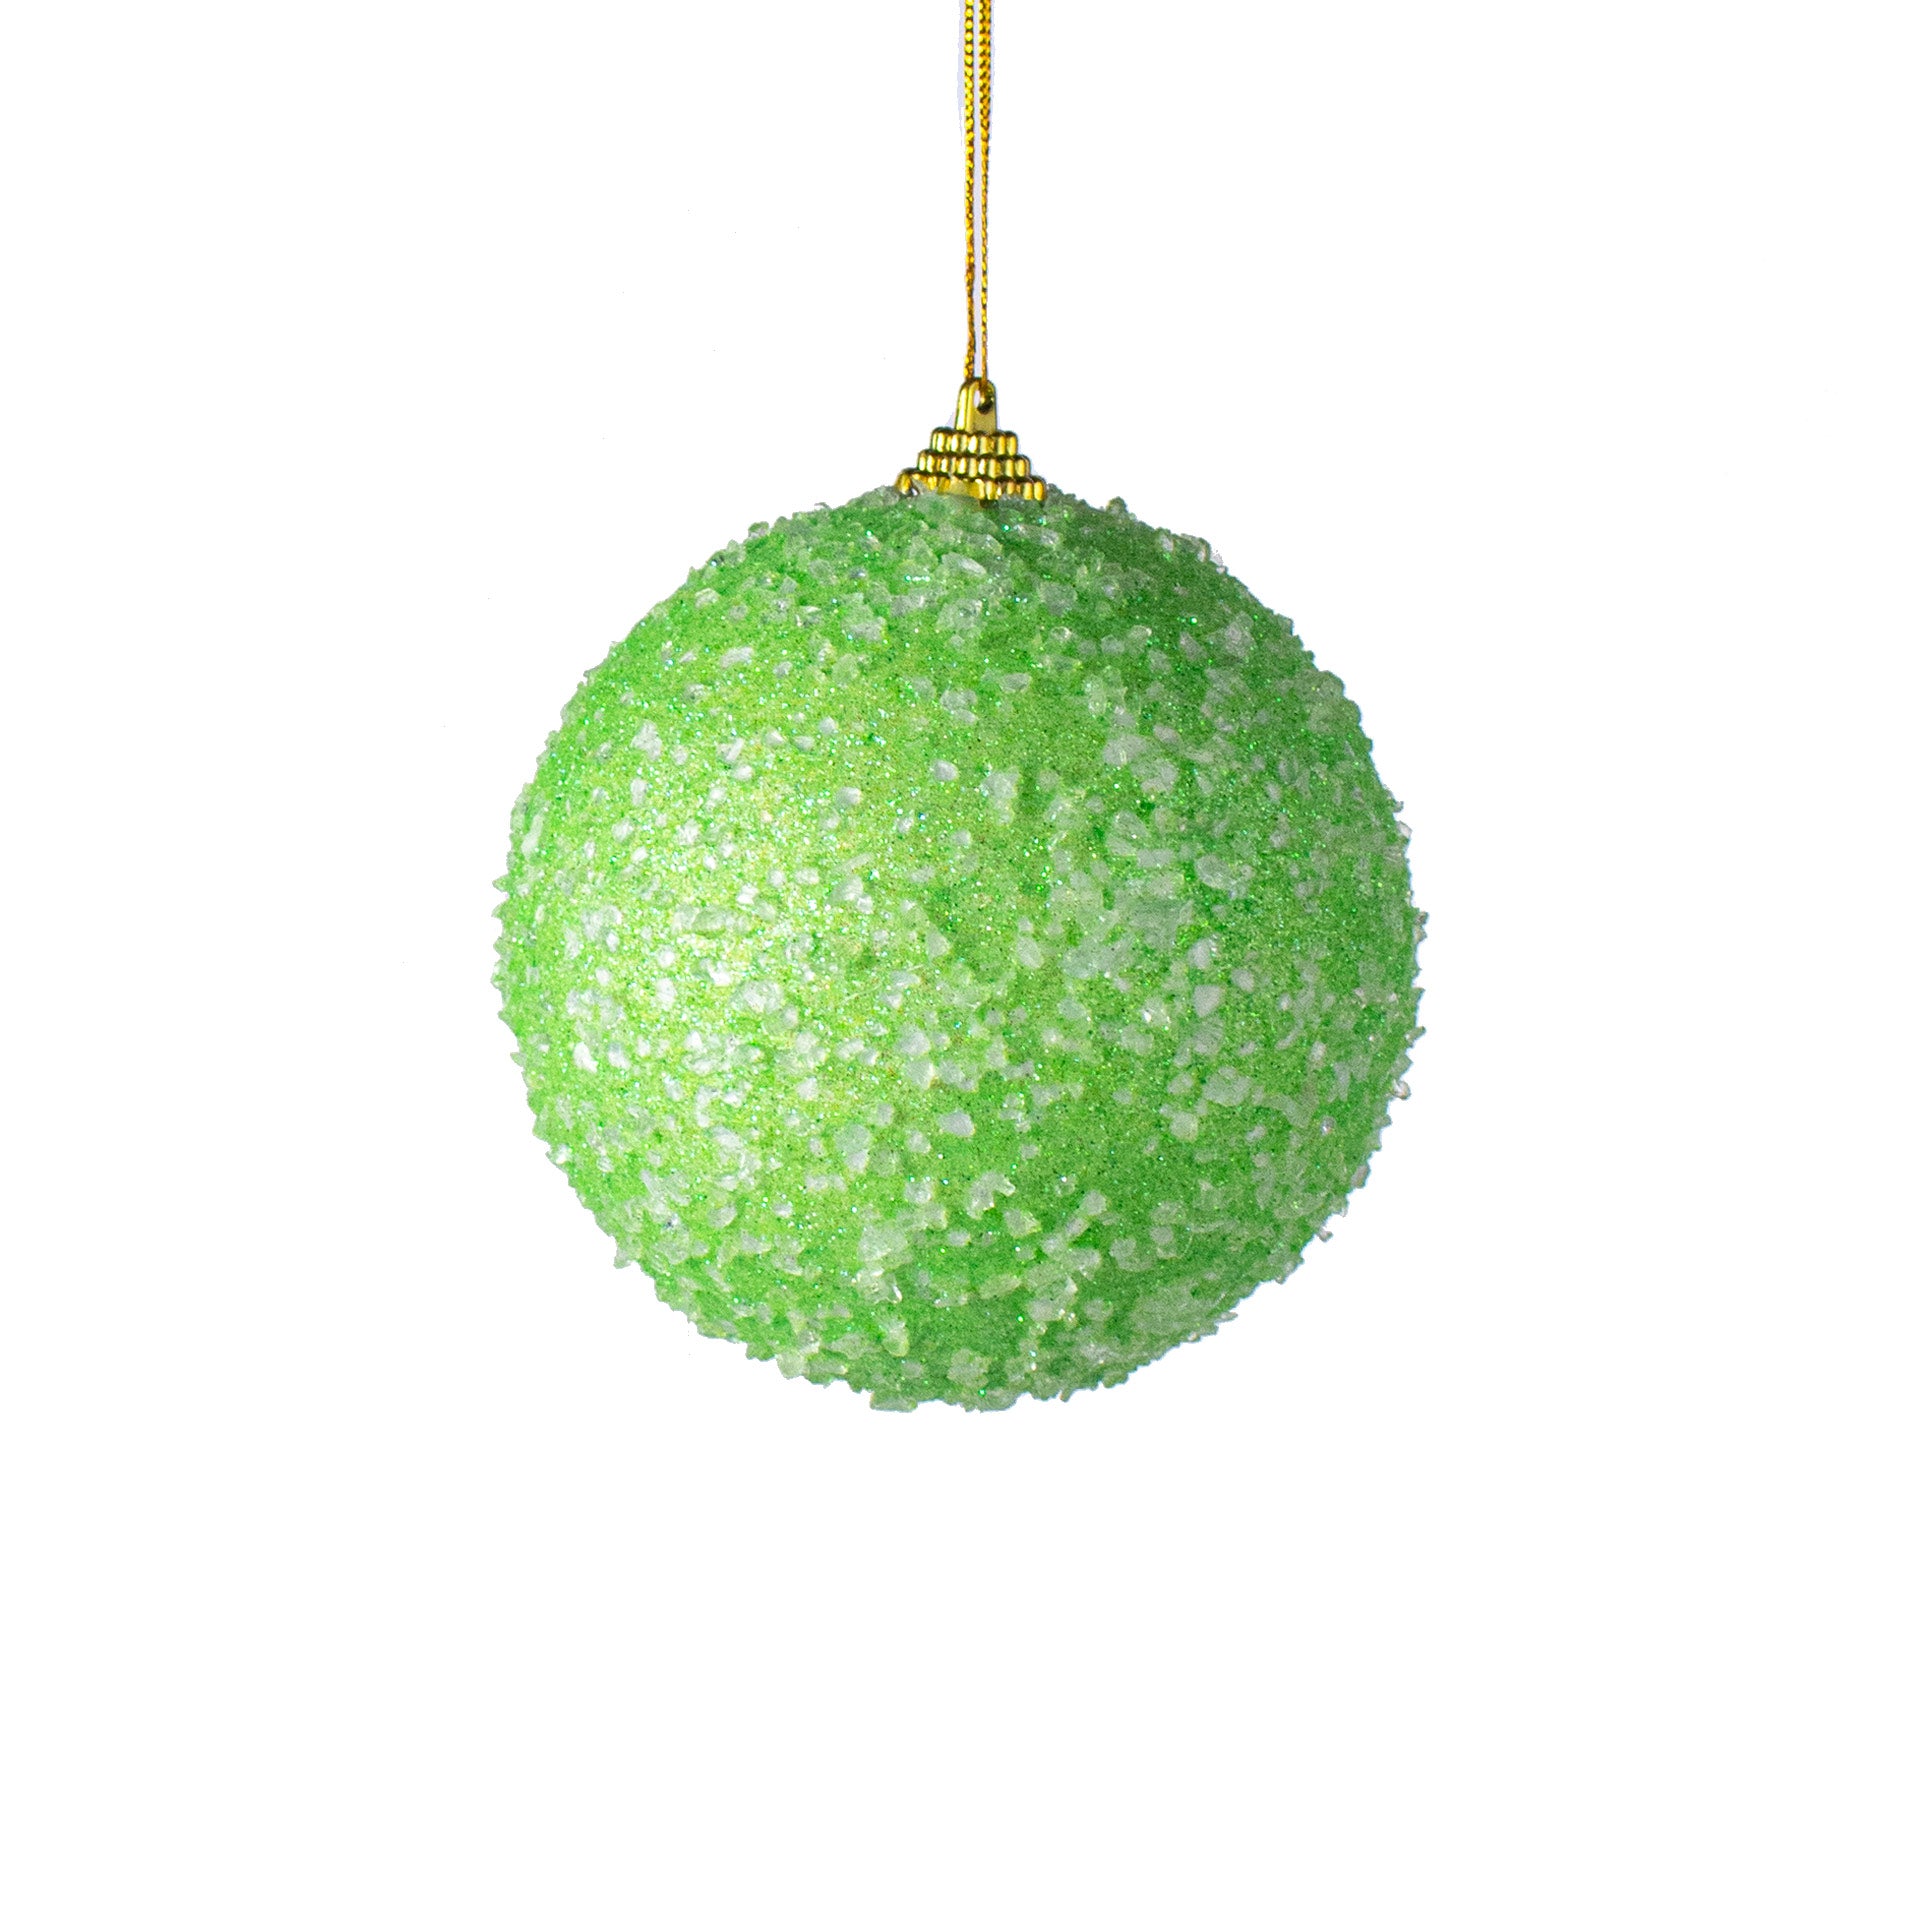 4" Icy Ball Ornament: Light Green